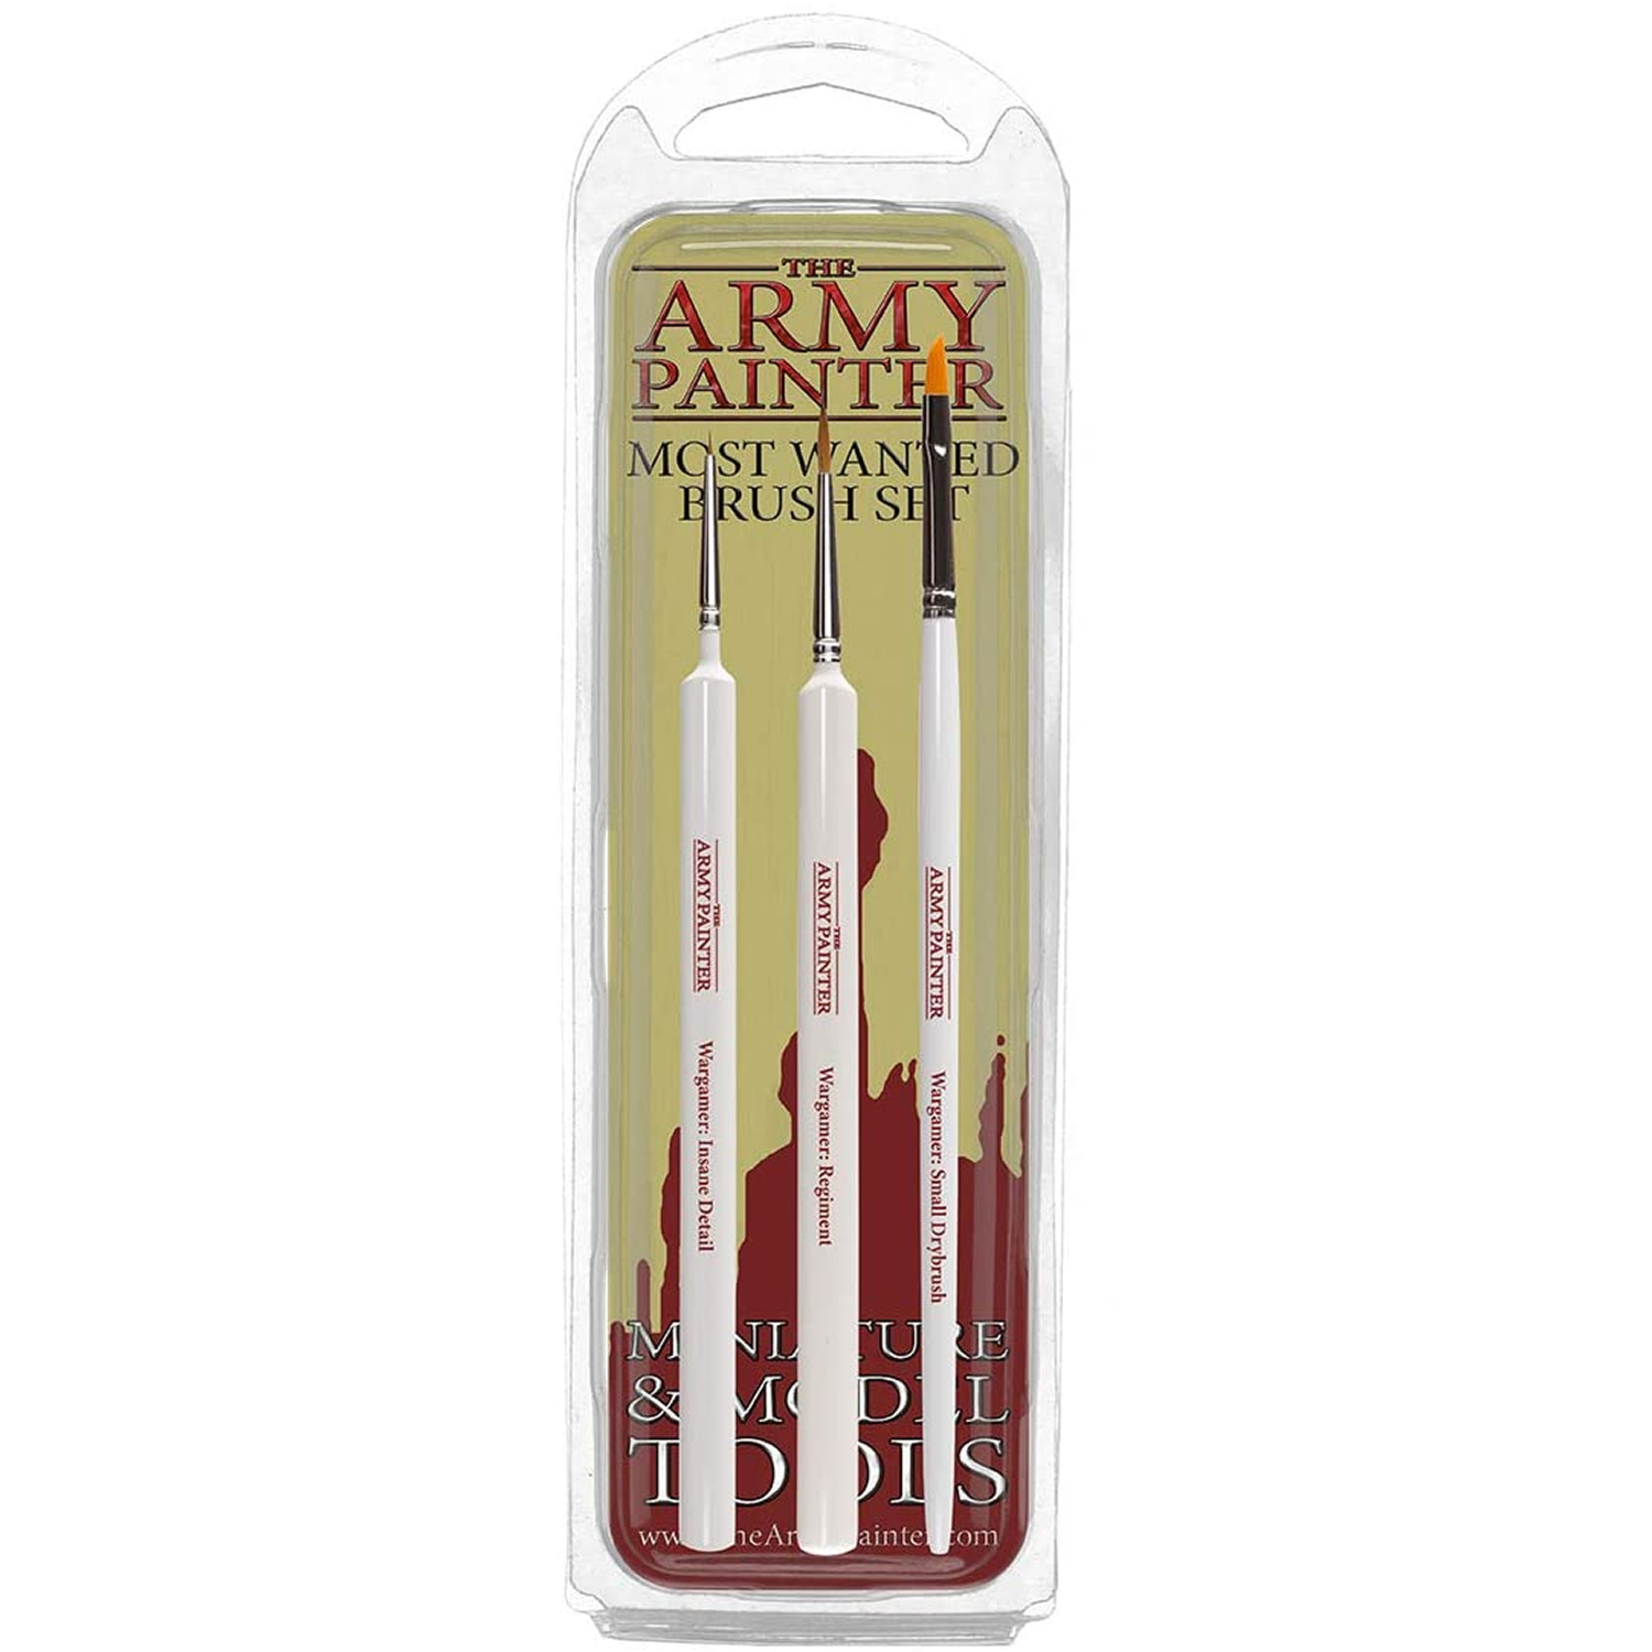 Army Painter Army Painter Wargamers Most Wanted Brush Set